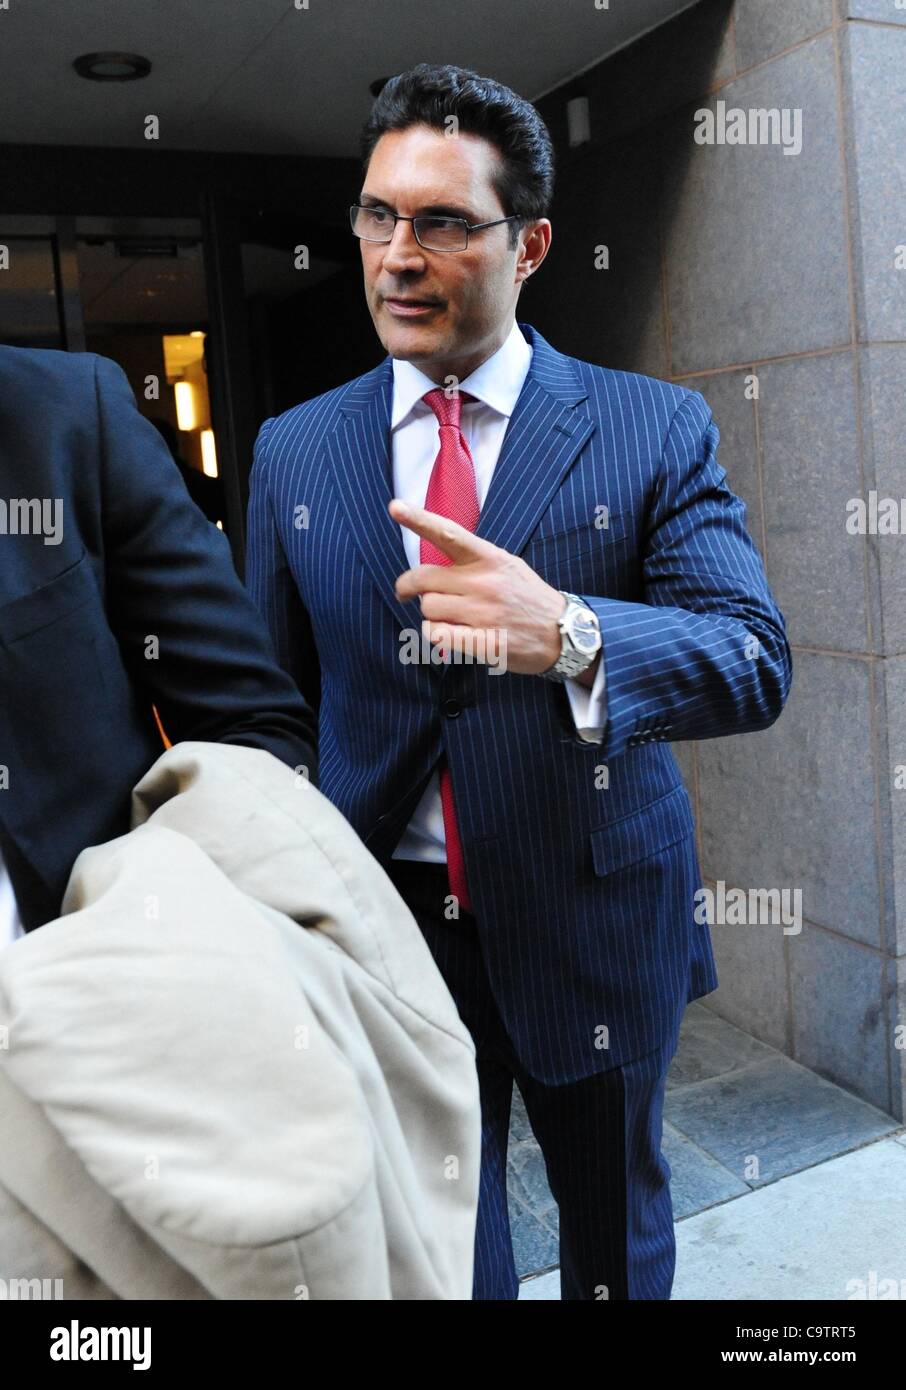 Feb. 20, 2012 - Manhattan, New York, U.S. - ADAM HOCK, accused of assault, leaves his apartment building on West 22nd Street. A fight involving vodka and supermodels at a Meatpacking District nightclub landed Monaco's Prince Pierre Casiraghi in the hospital. Stock Photo